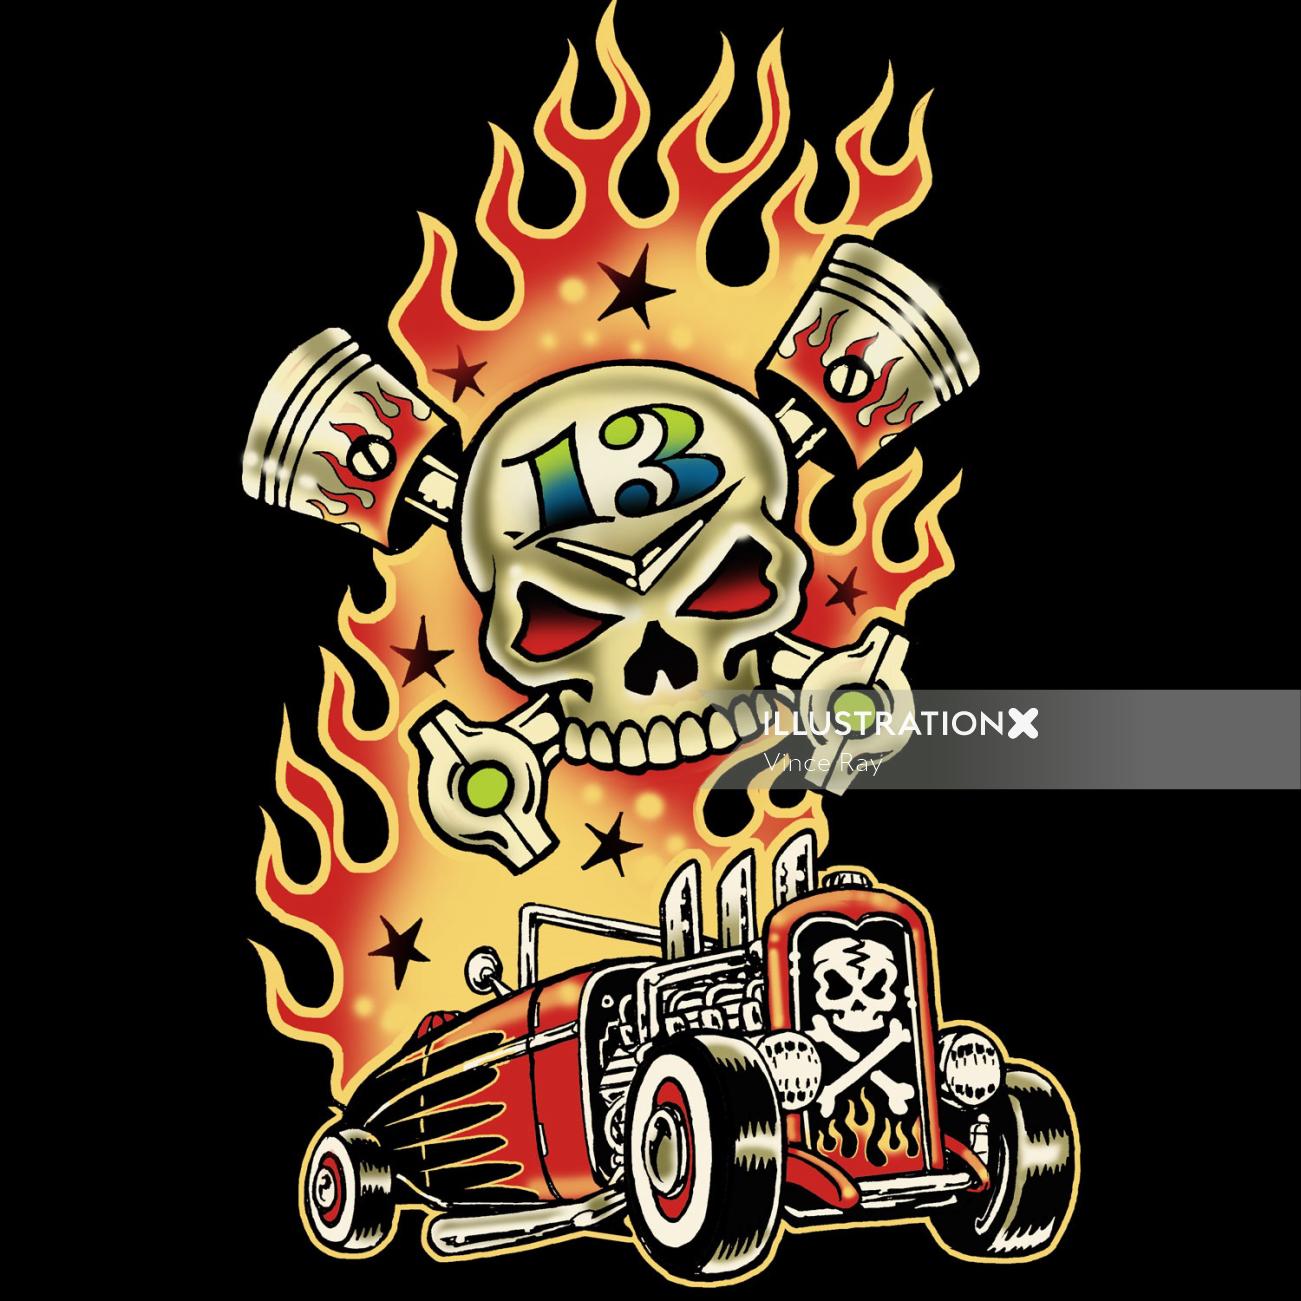 Low brow art of a car with fire by Vince Ray